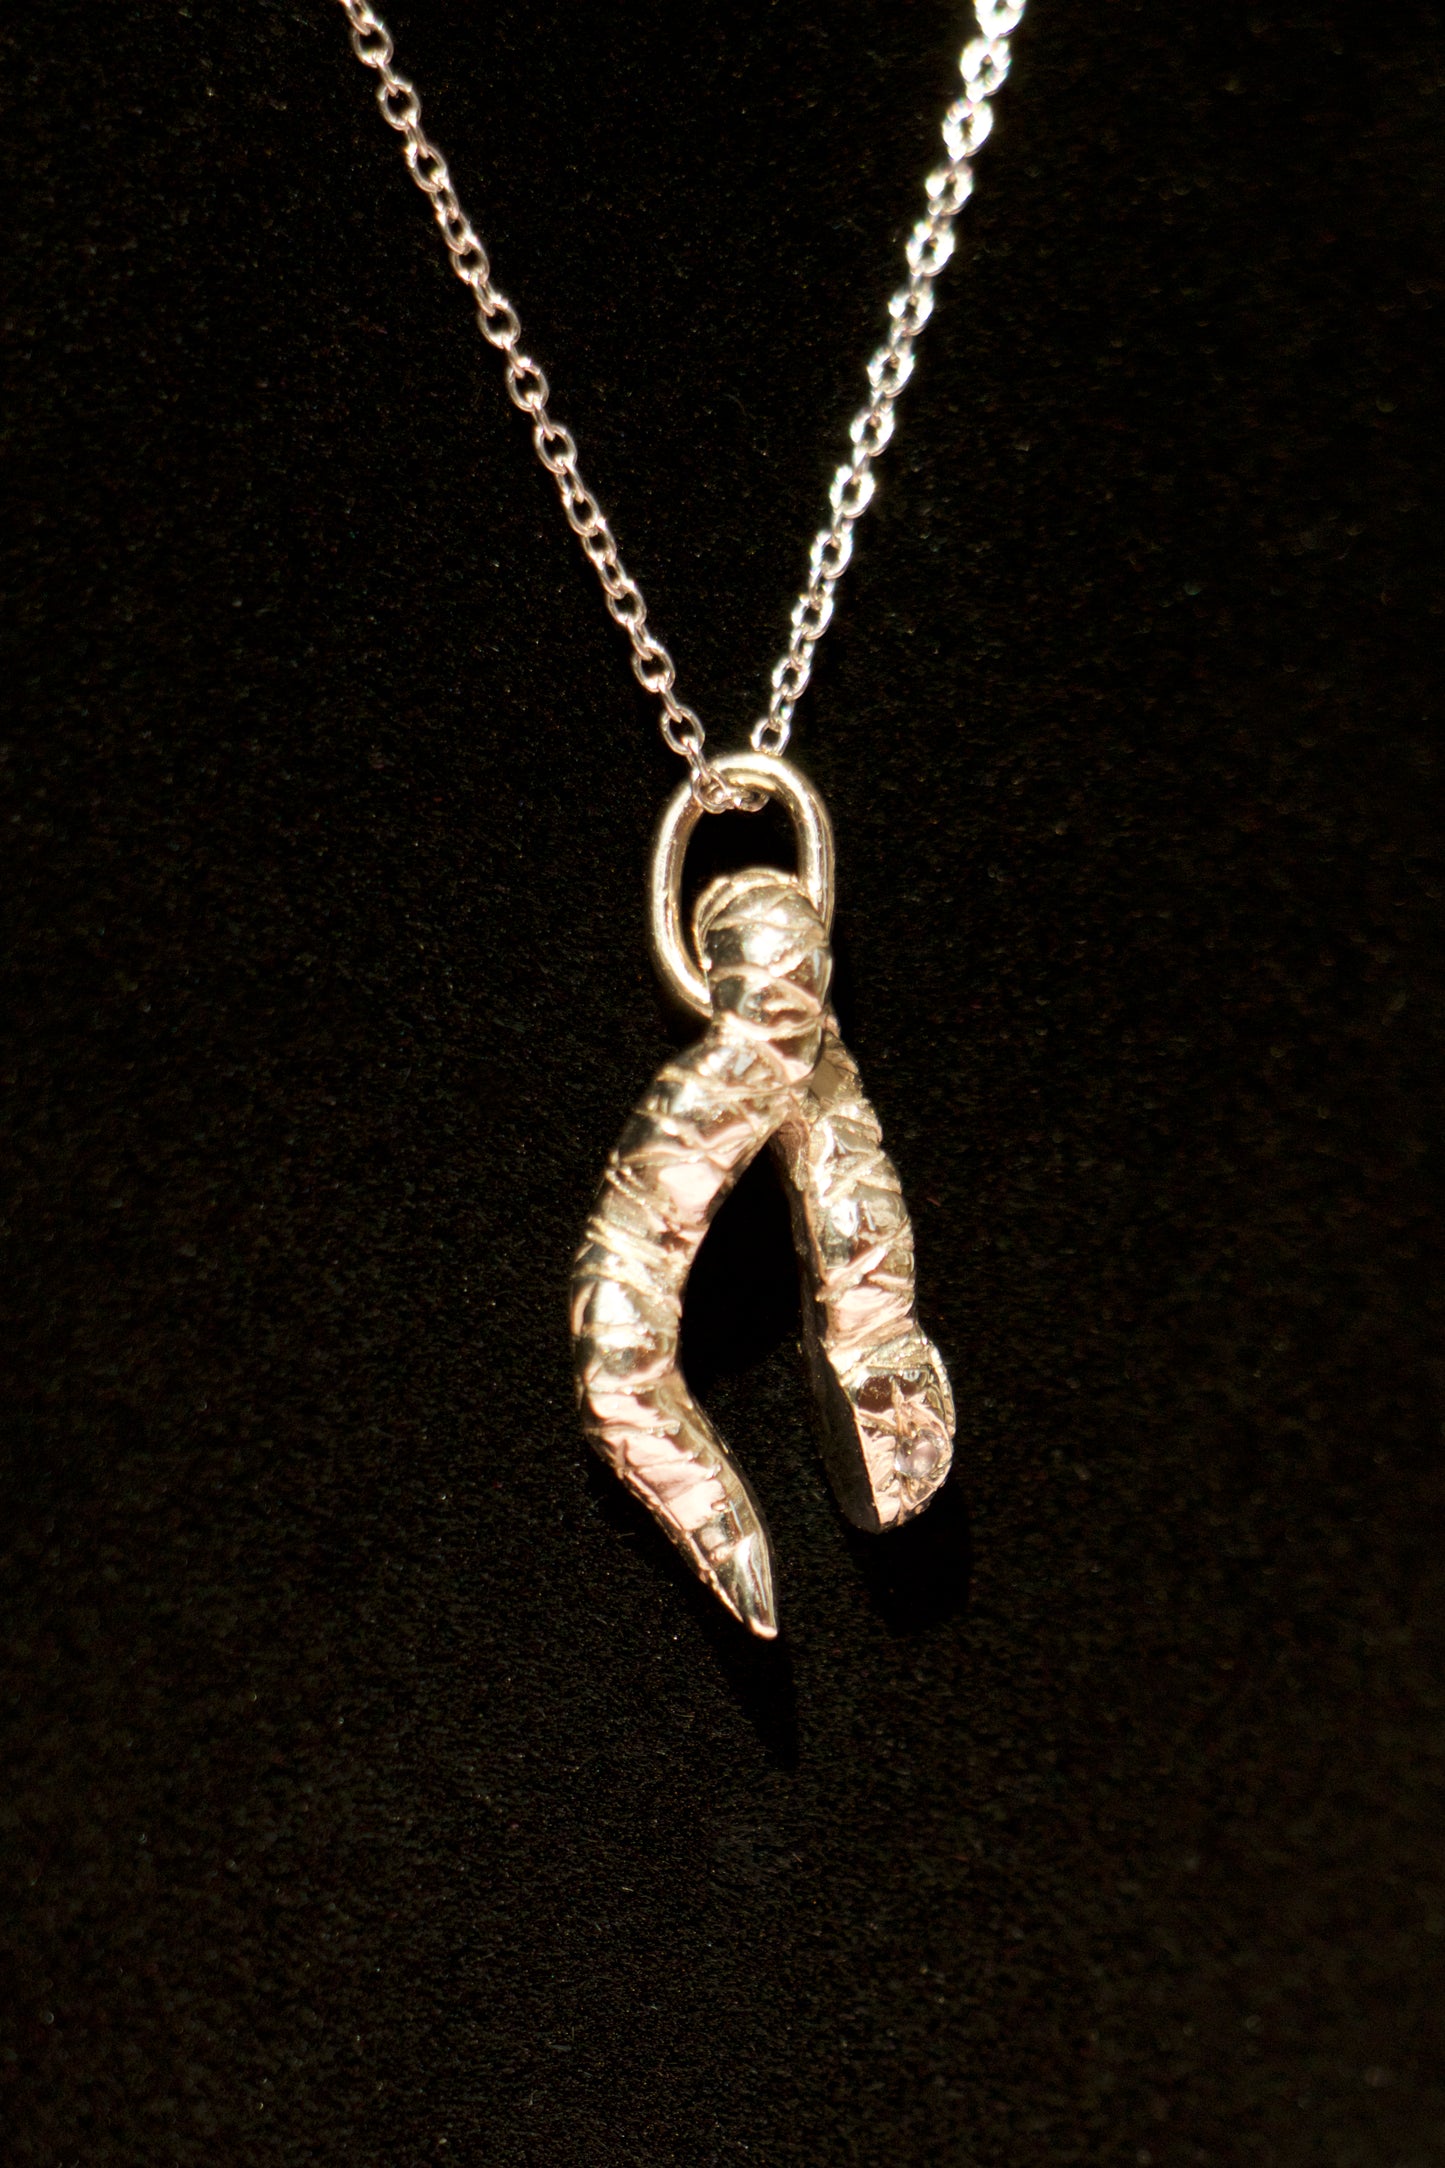 SAMPLE Snake pendant with two diamond eyes + 16" chain